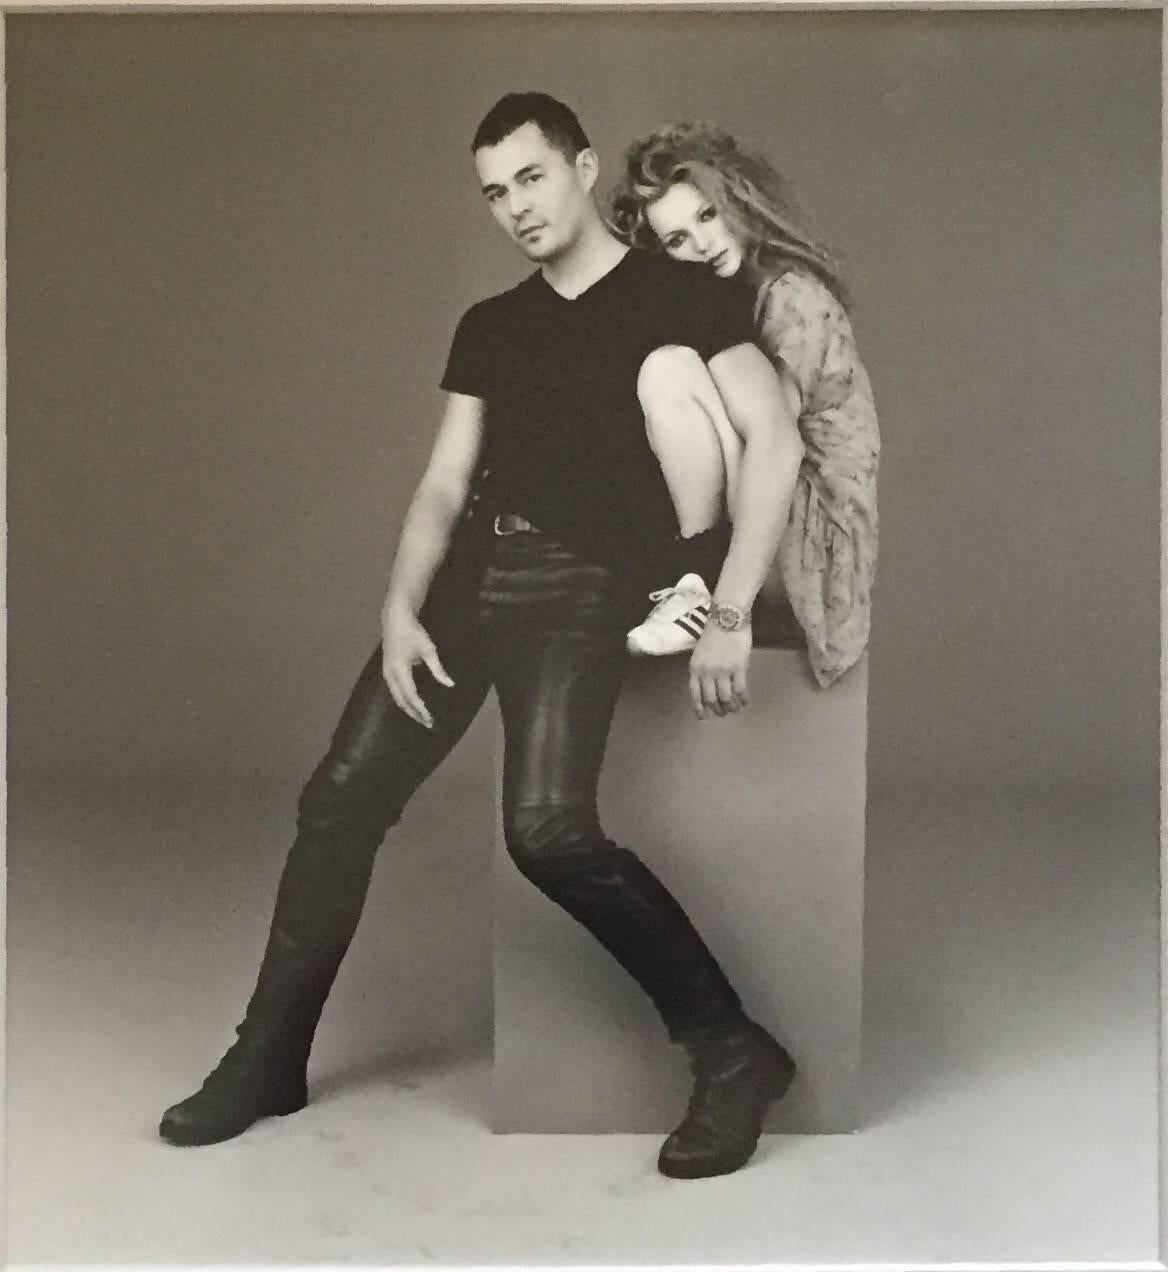 Unknown Black and White Photograph - Vintage B&W Fine Art Fashion Photgraph of Kate Moss & Paul Rowland